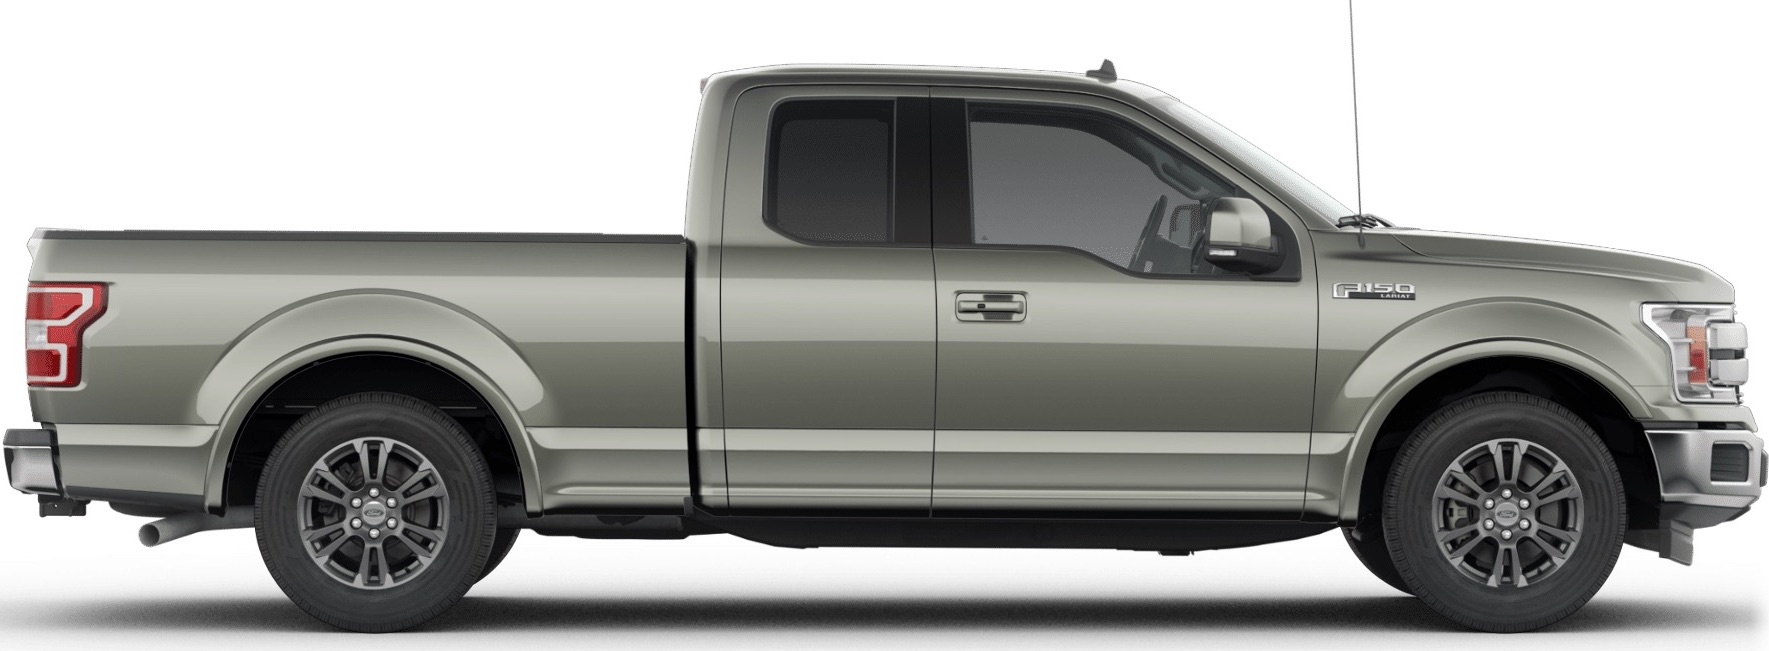 2006 Ford F 150 Color Chart